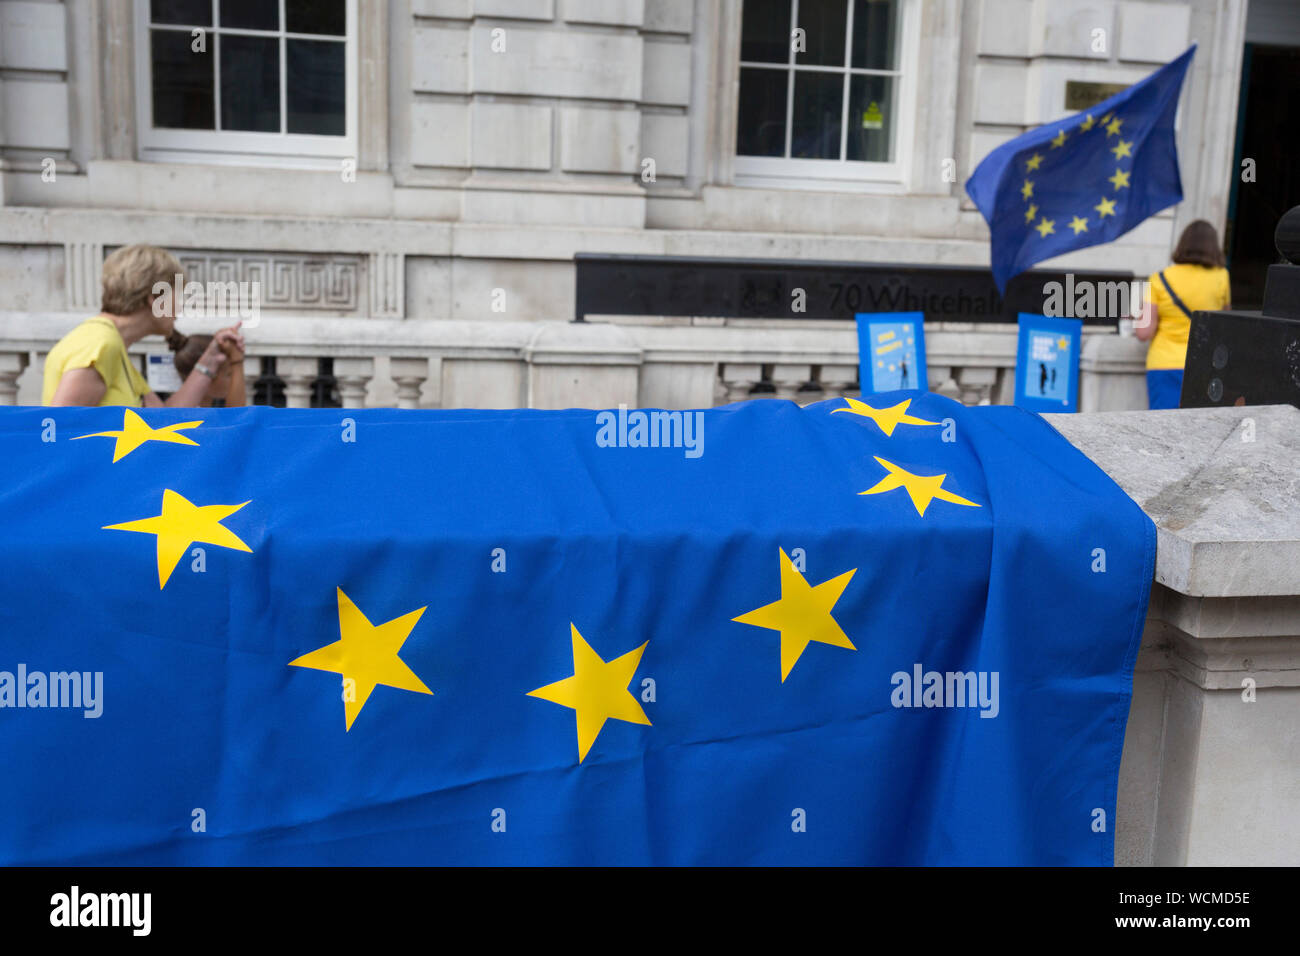 On the day that British Prime Minister Boris Johnson sought to have Parliament suspended by Queen Elizabeth, days after MPs return to work in September - and only a few weeks before the Brexit deadline, tourists walk past pro-EU Remain voters protest outside the Cabinet Office where daily Brexit contingency planning meetings take place, on 28th August 2019, in Whitehall, Westminster, London, England. Stock Photo